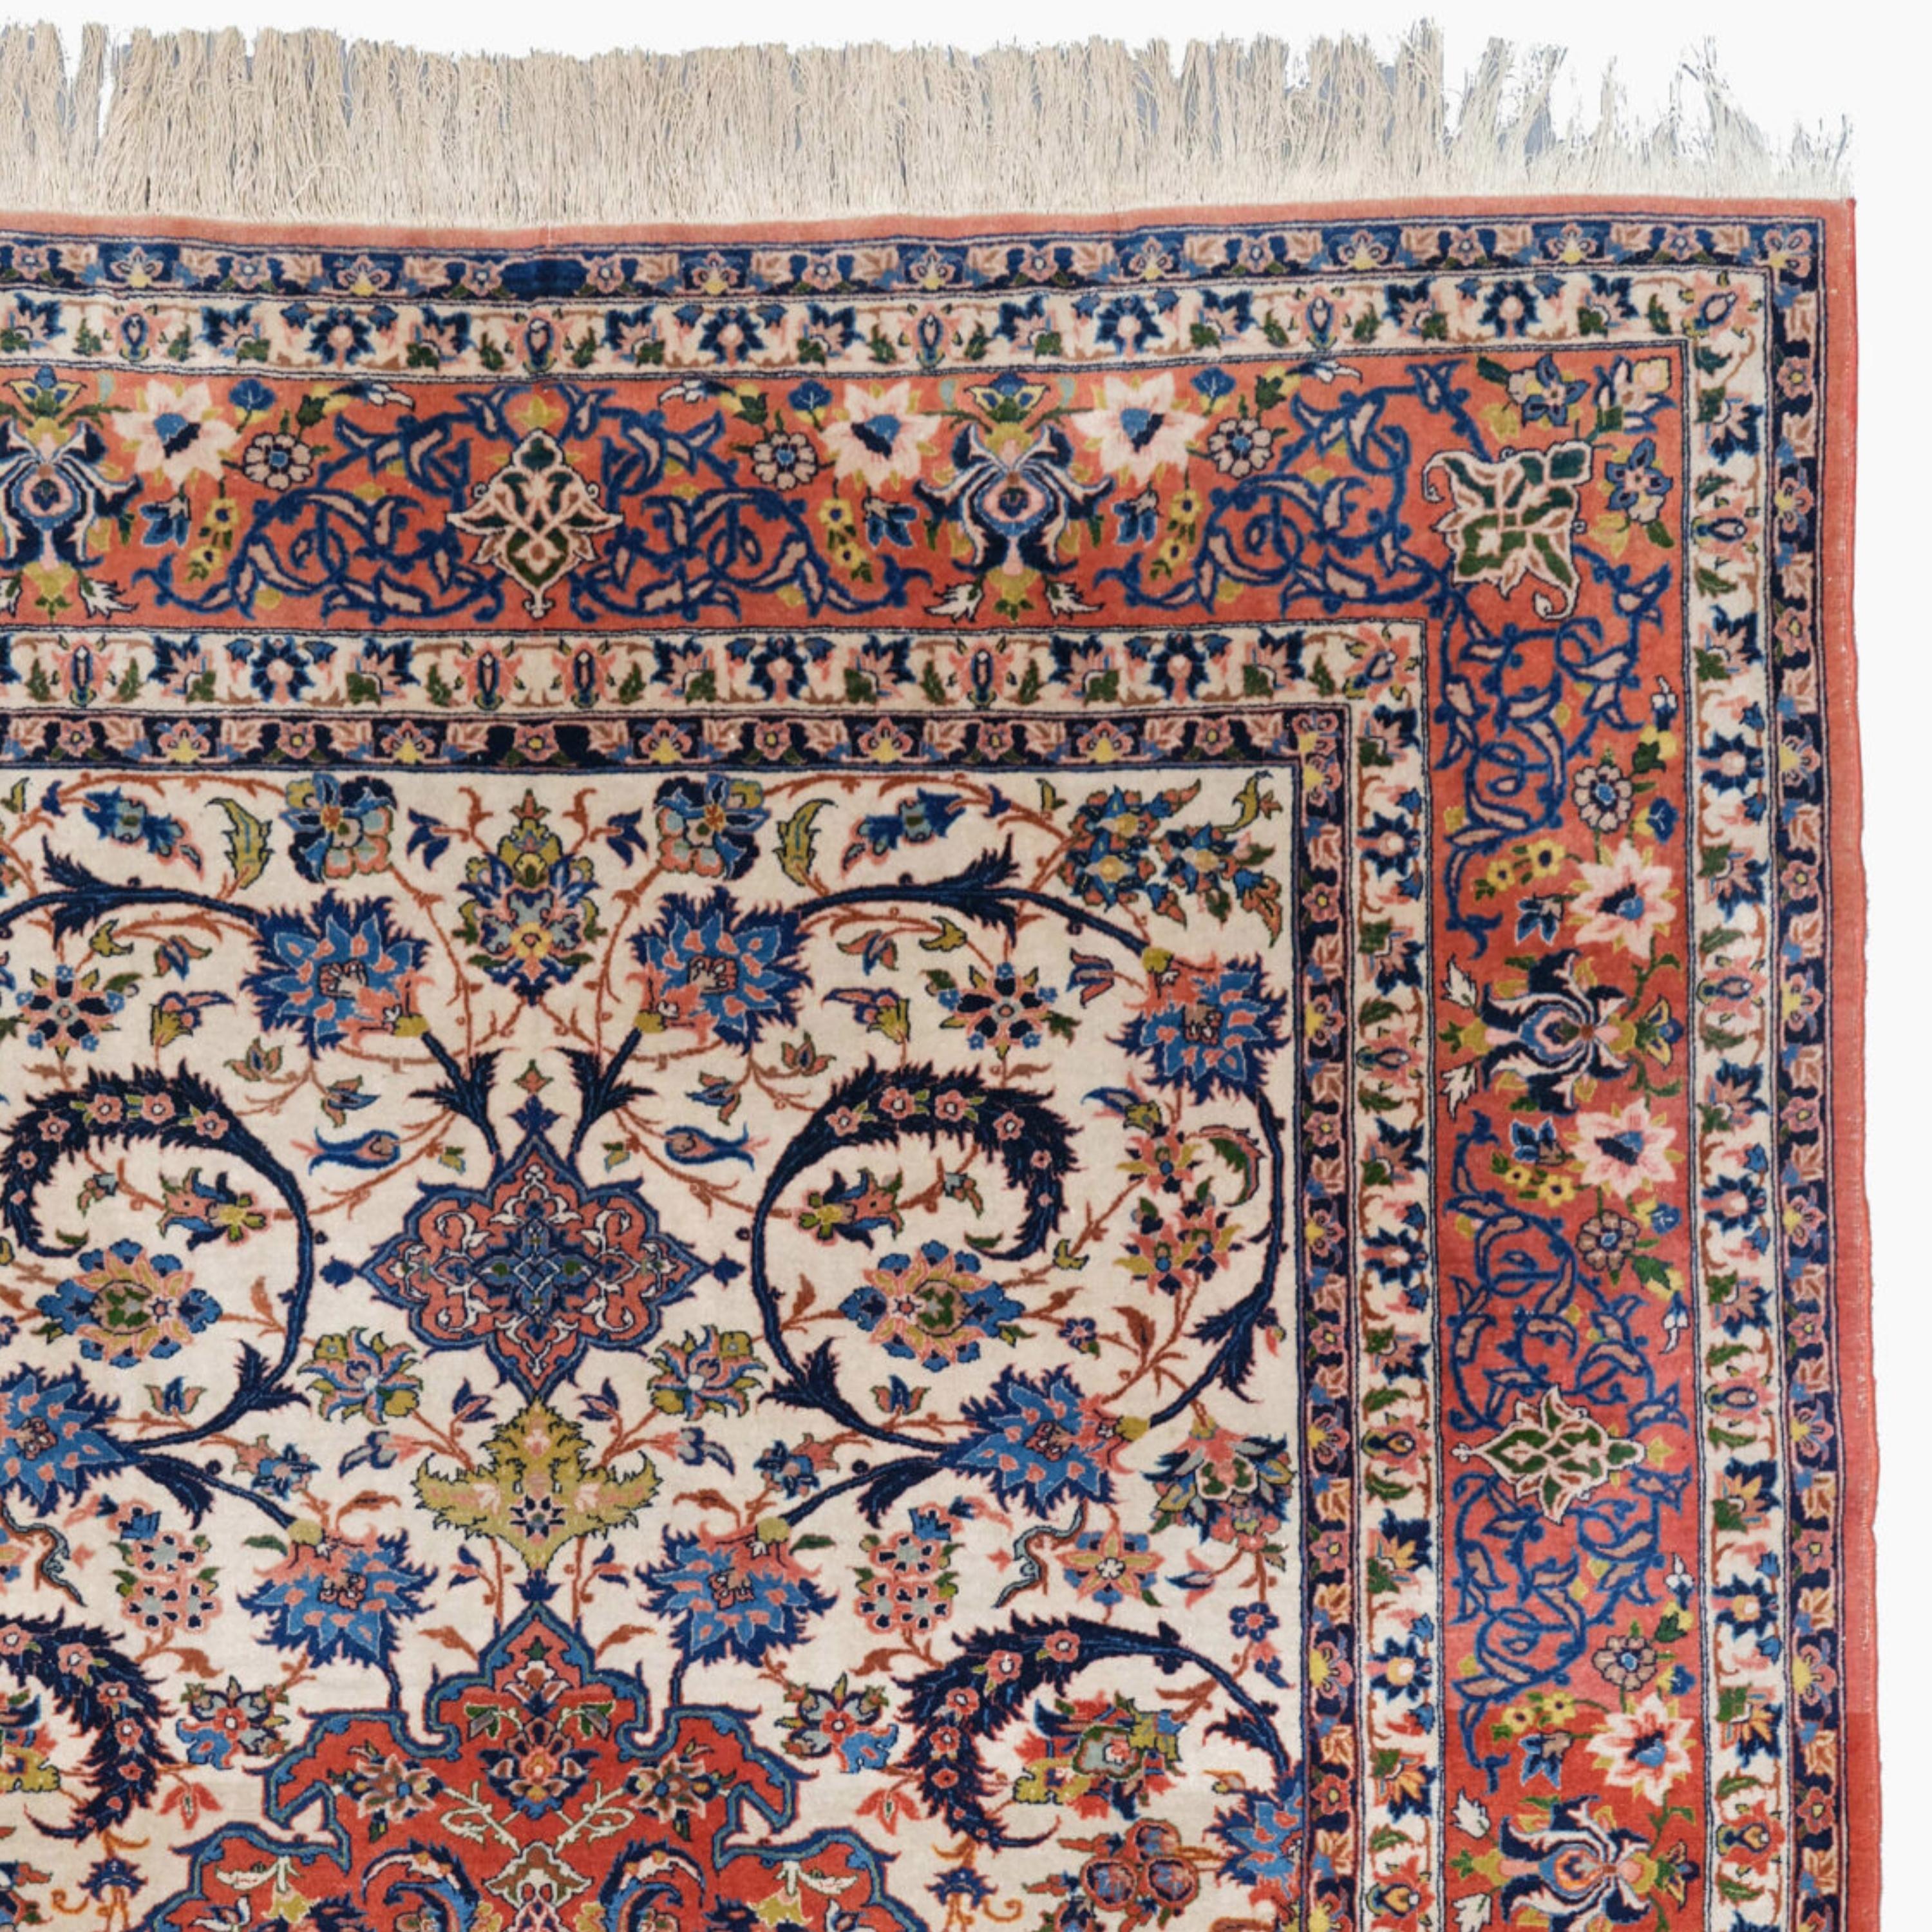 Antique Isfahan Rug - Late of 19th Centıry Isfahan Rug In Good Condition For Sale In Sultanahmet, 34